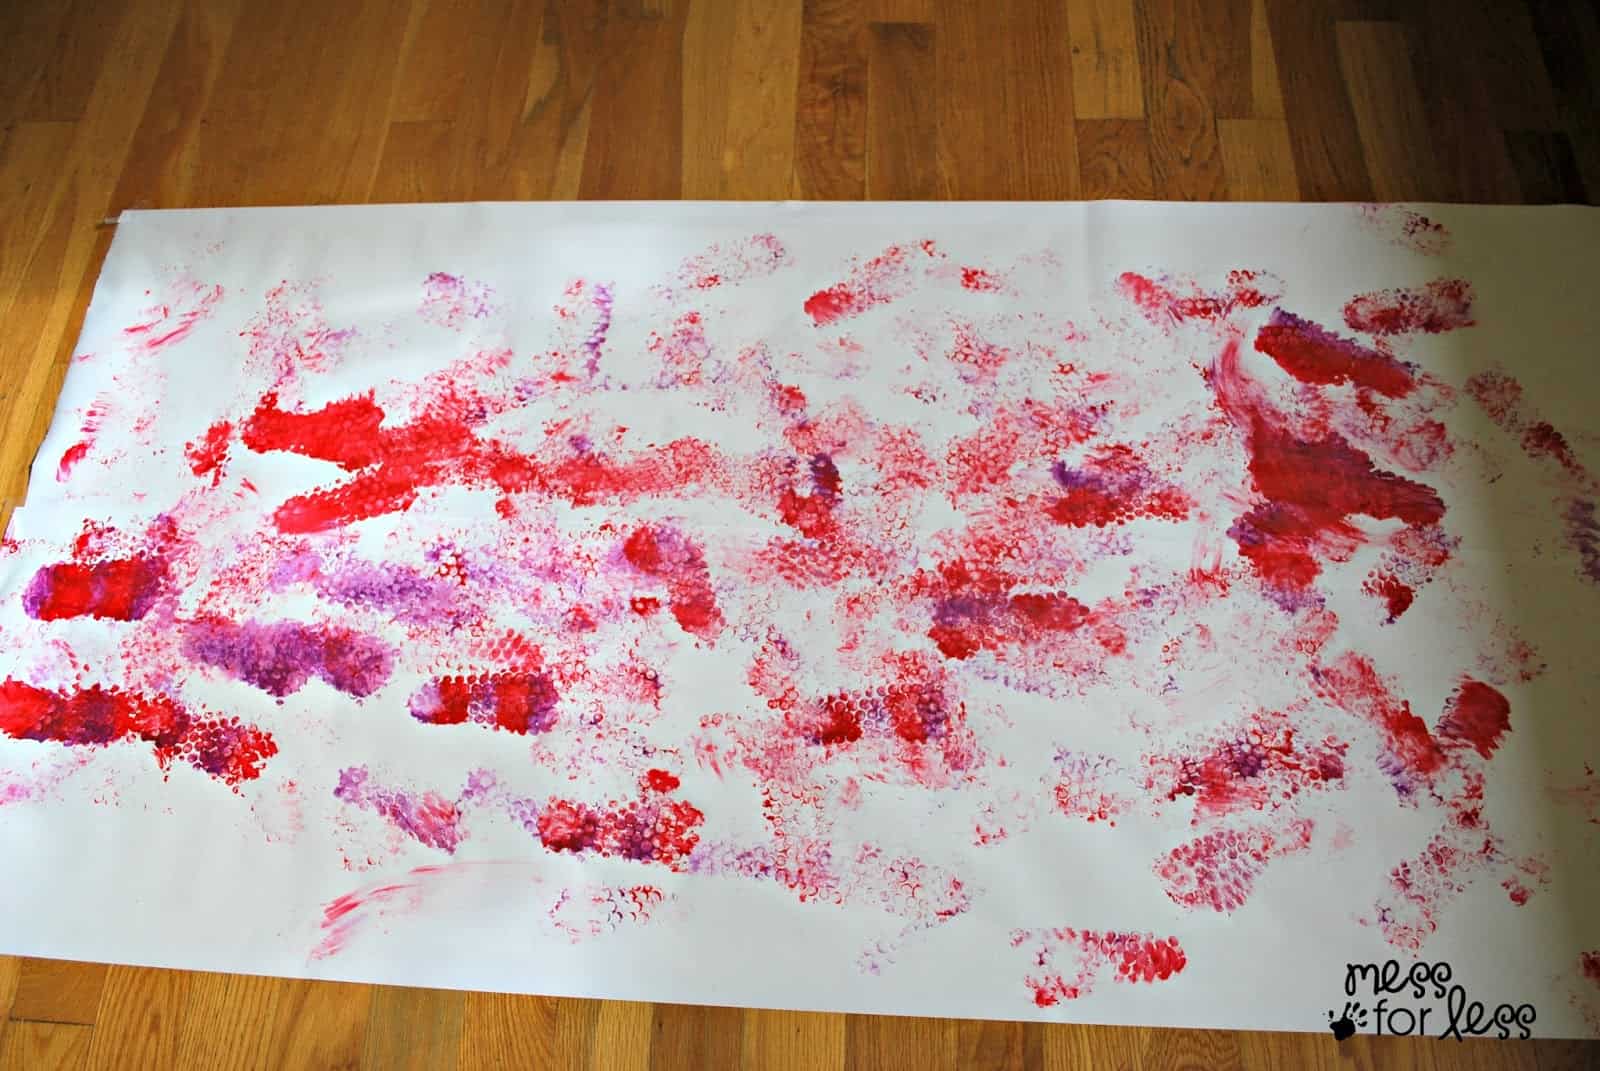 Bubble Wrap Stomp Painting Mess for Less